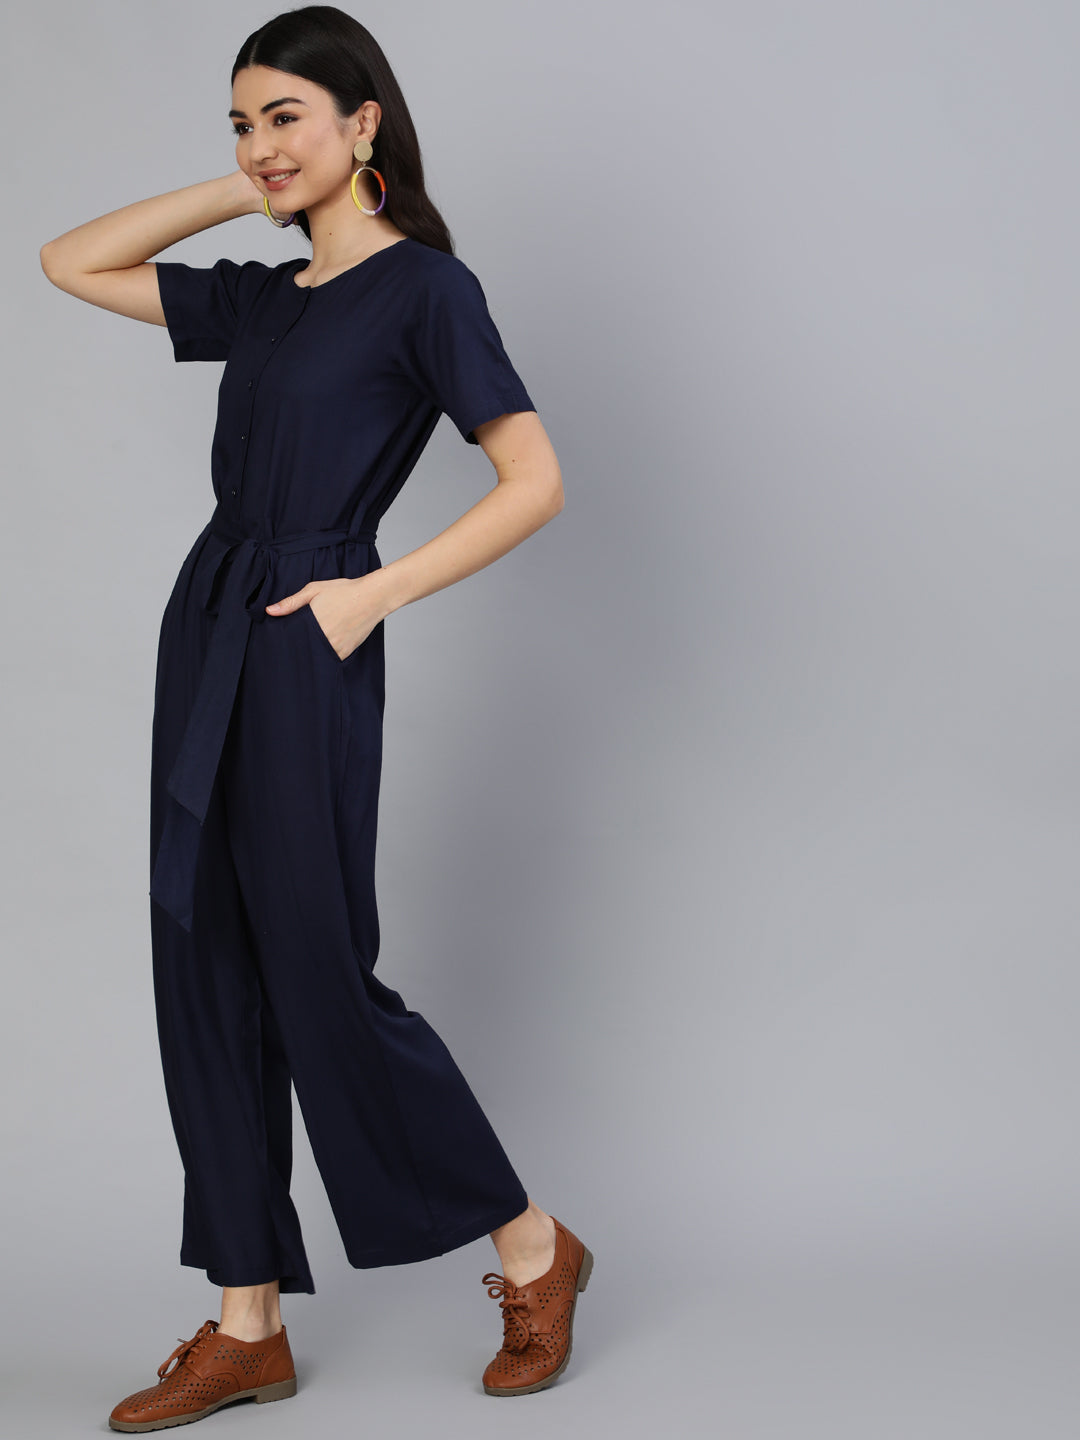 Women's Navy Blue Jumpsuit With Side Pockets - Nayo Clothing